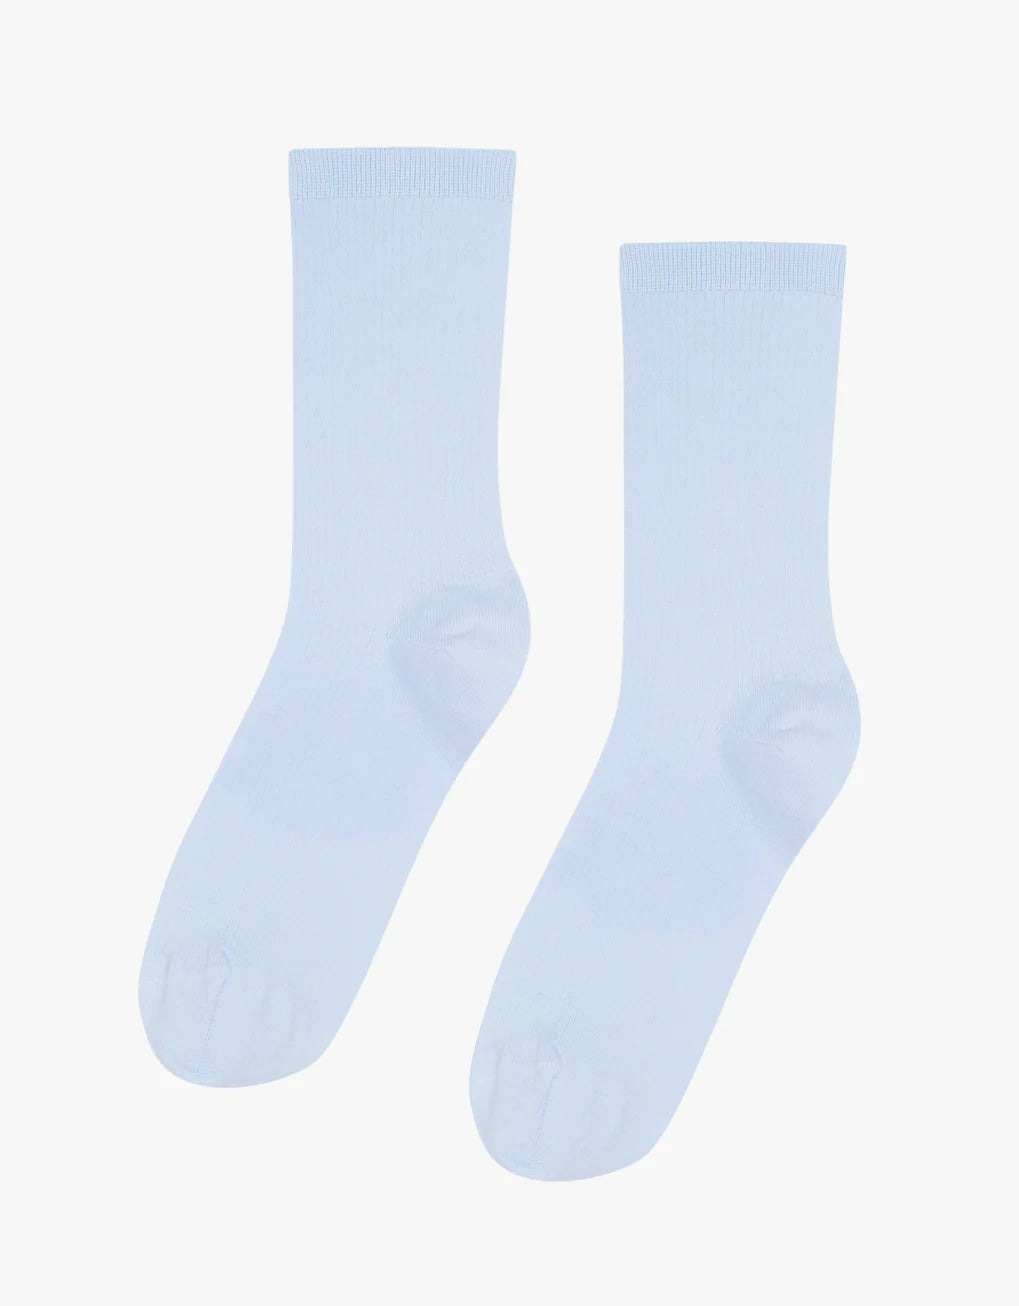 A pair of Classic Organic Socks by Colorful Standard in light blue on a white background.